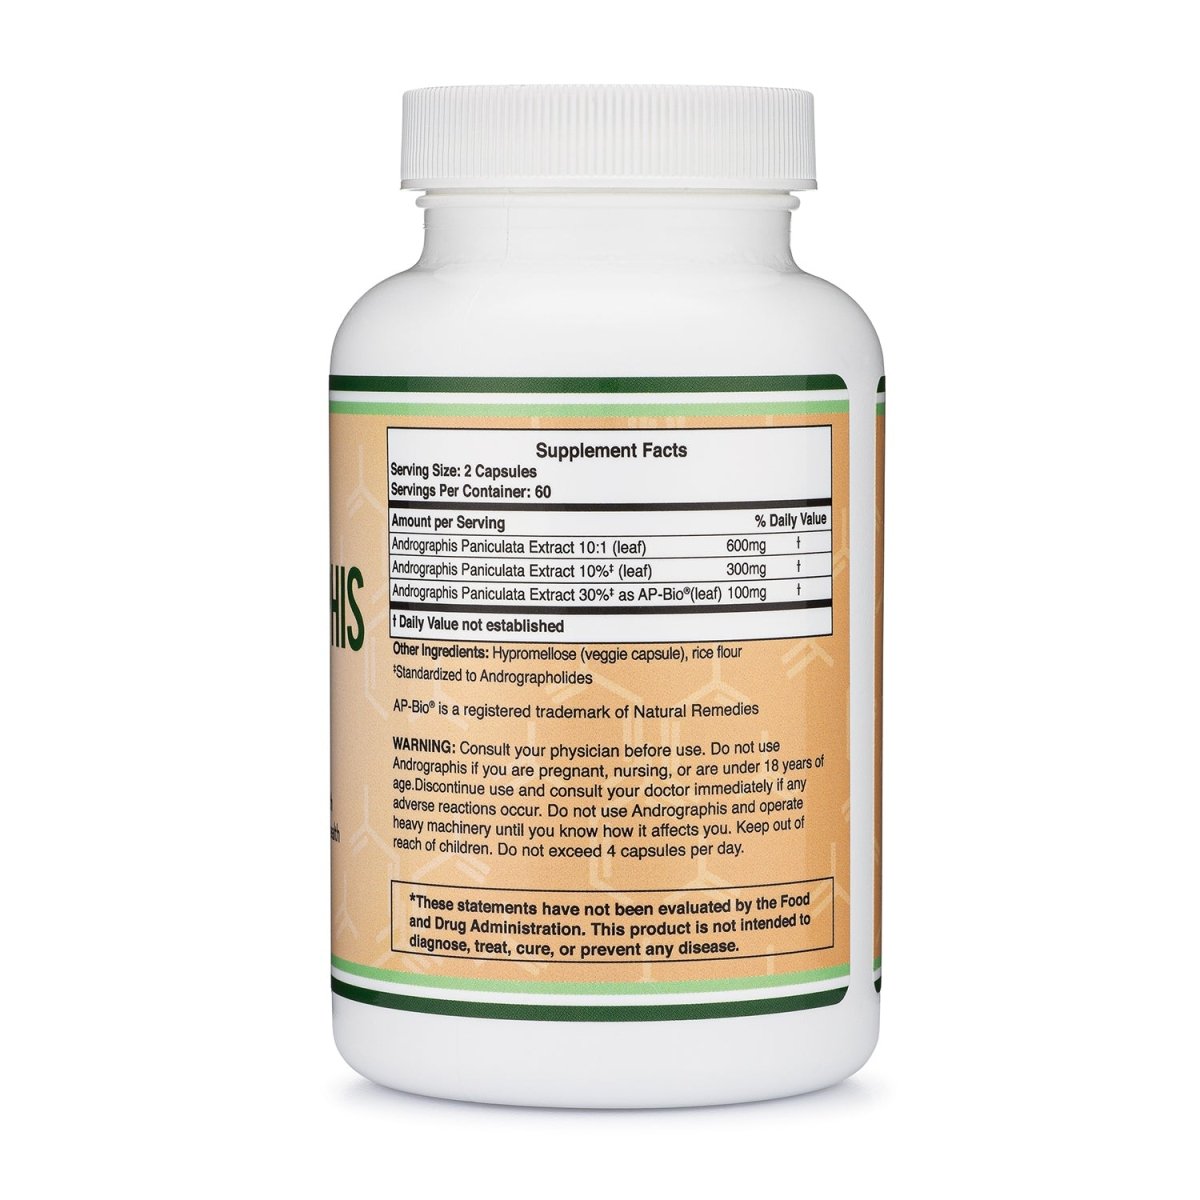 Andrographis Double Pack - Double Wood Supplements